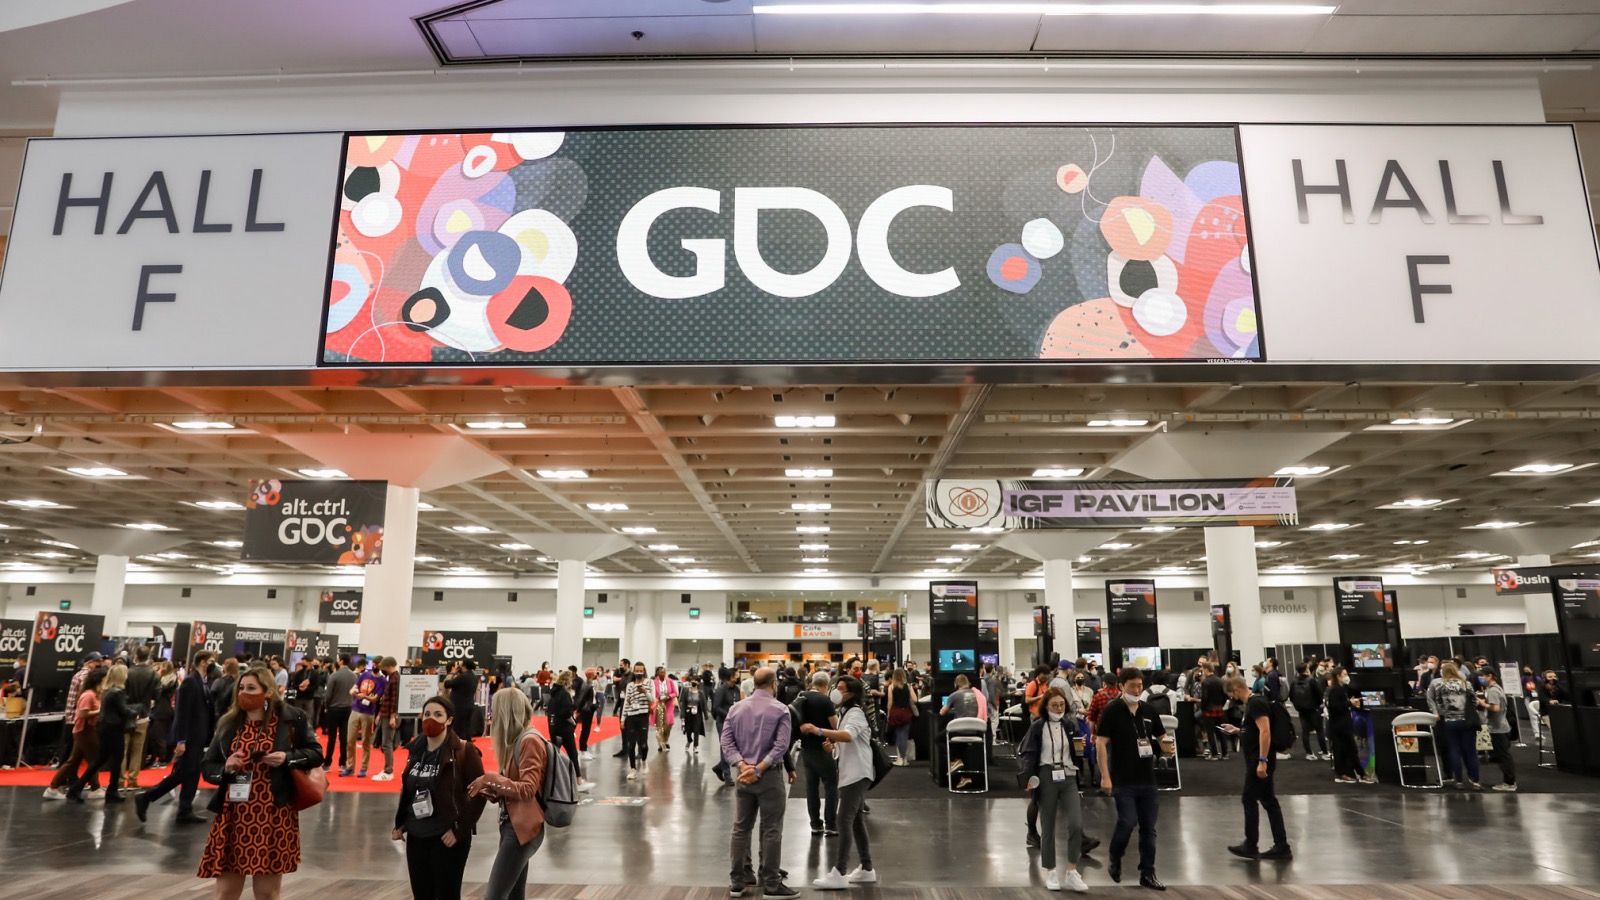 Check Out the Amazing Sponsors and Expansive Expo Floor Coming to GDC